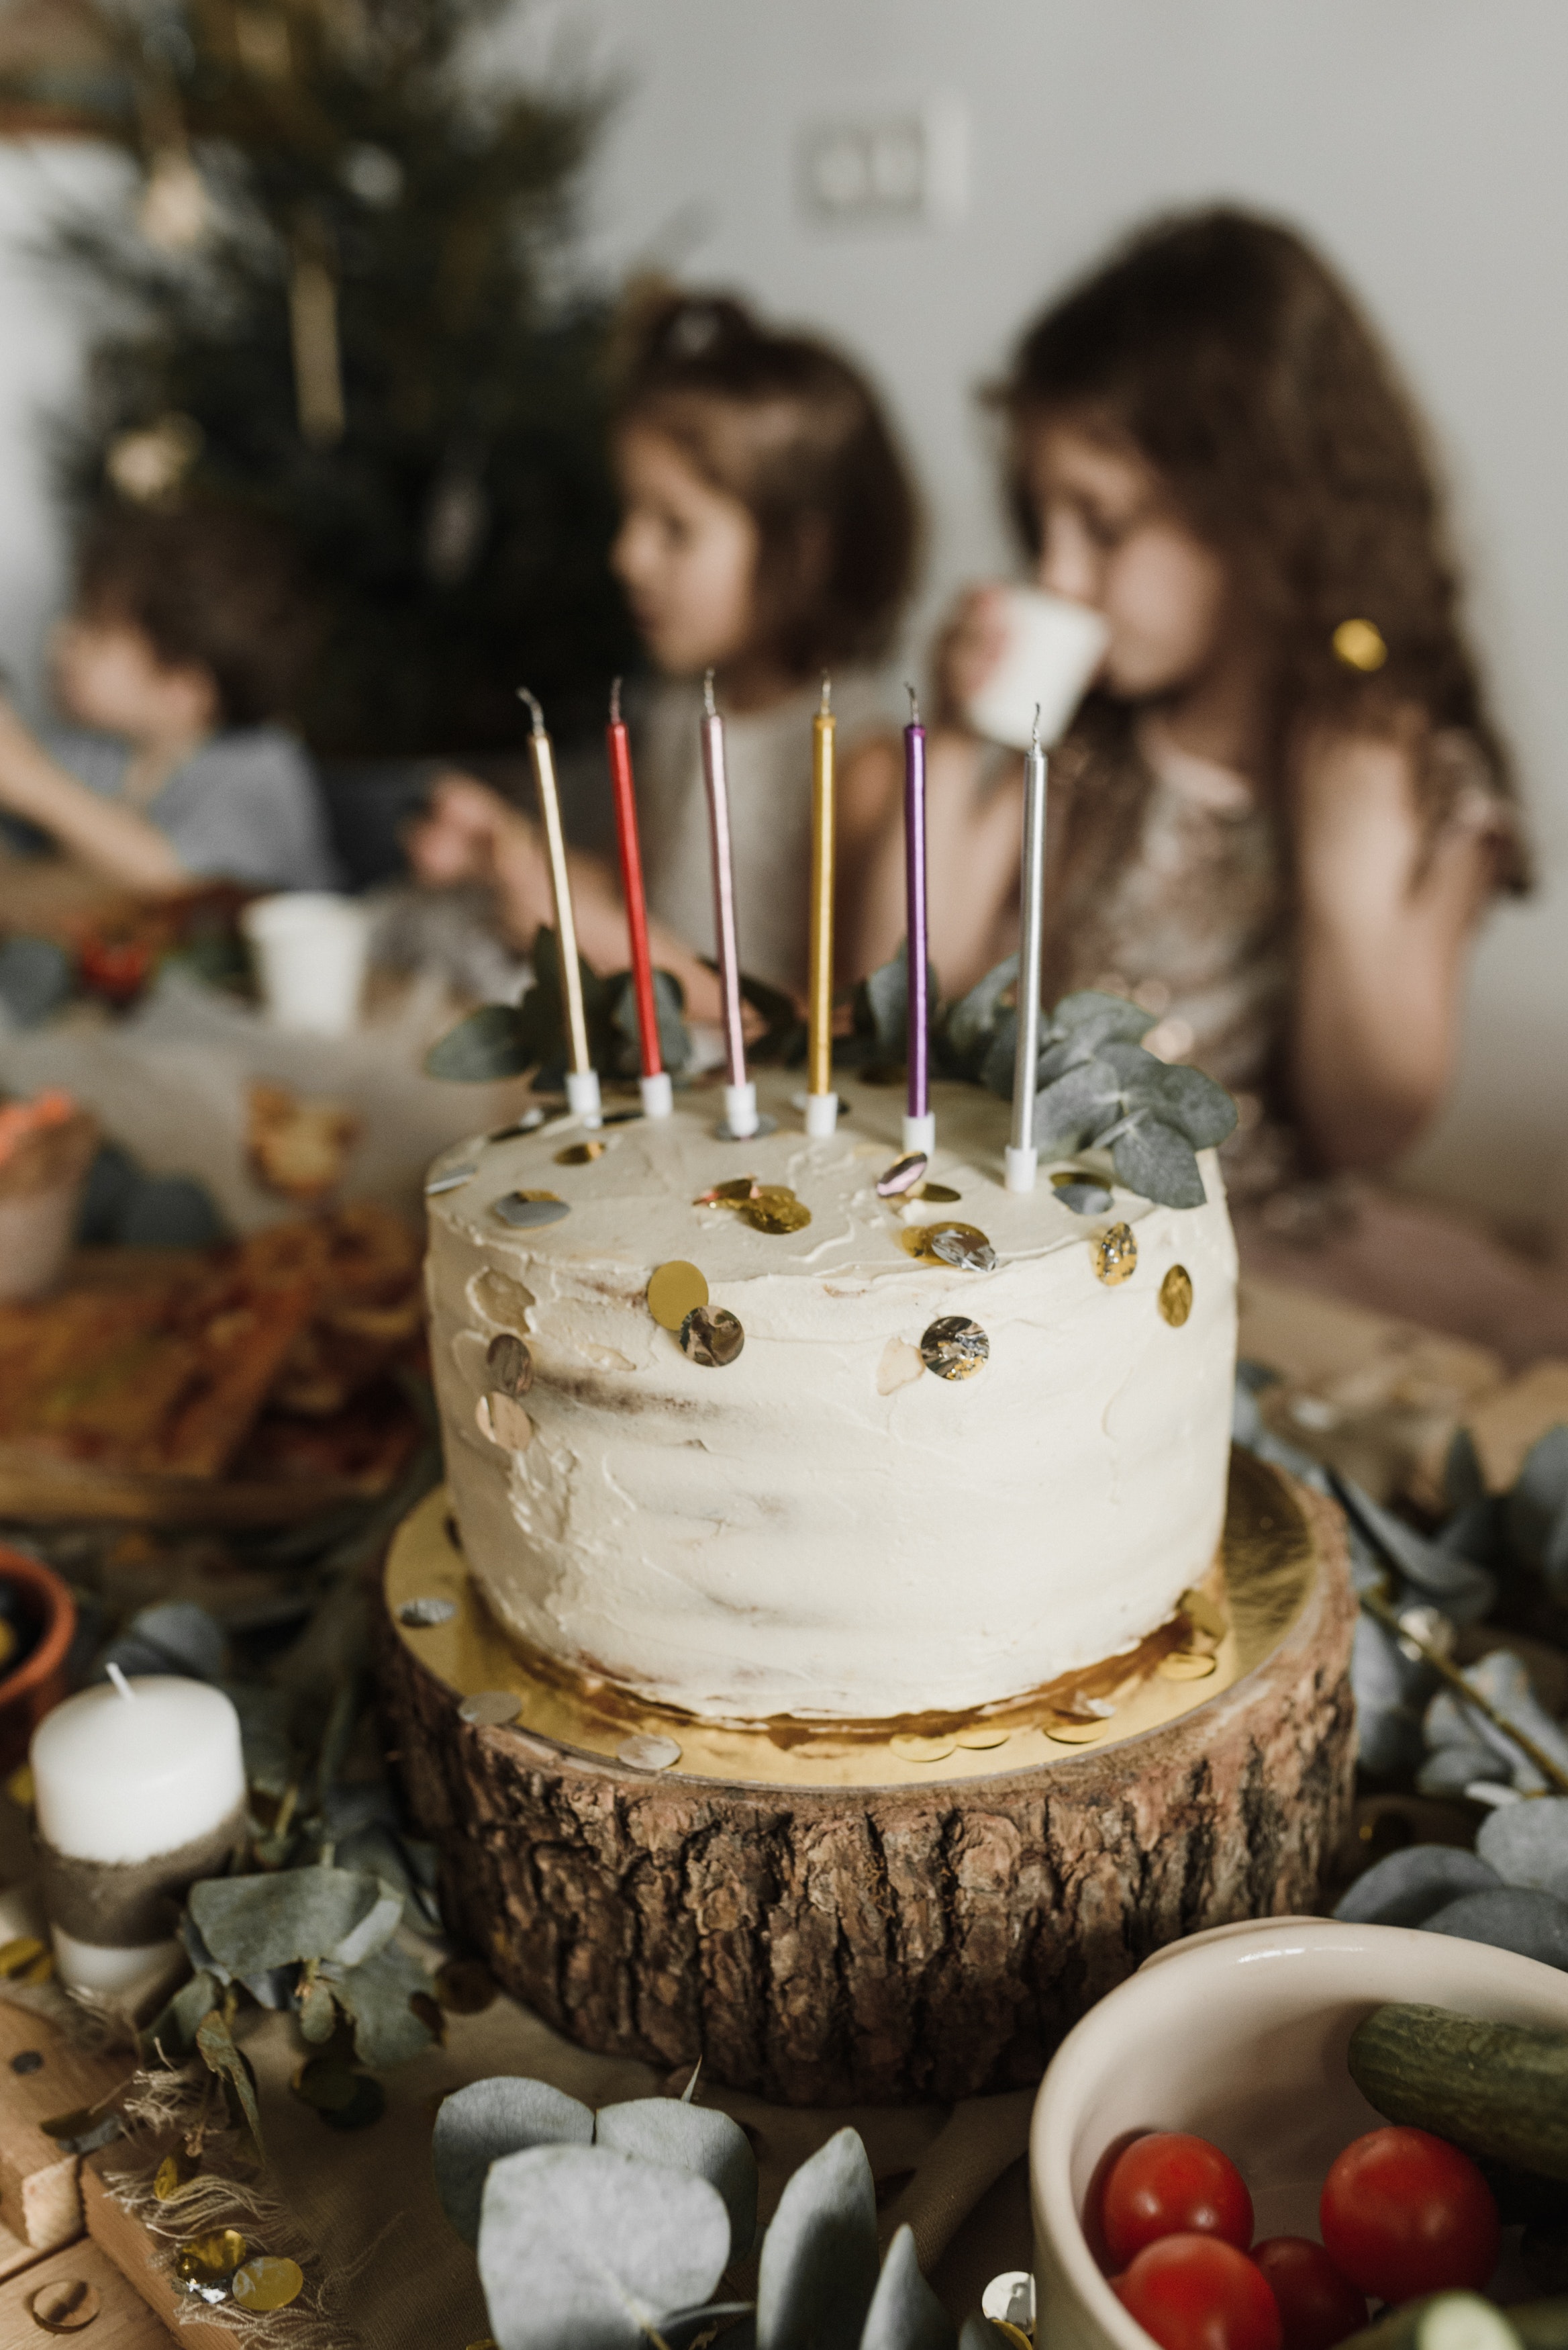 While other kids ate cake, he ate an apple. | Source: Pexels